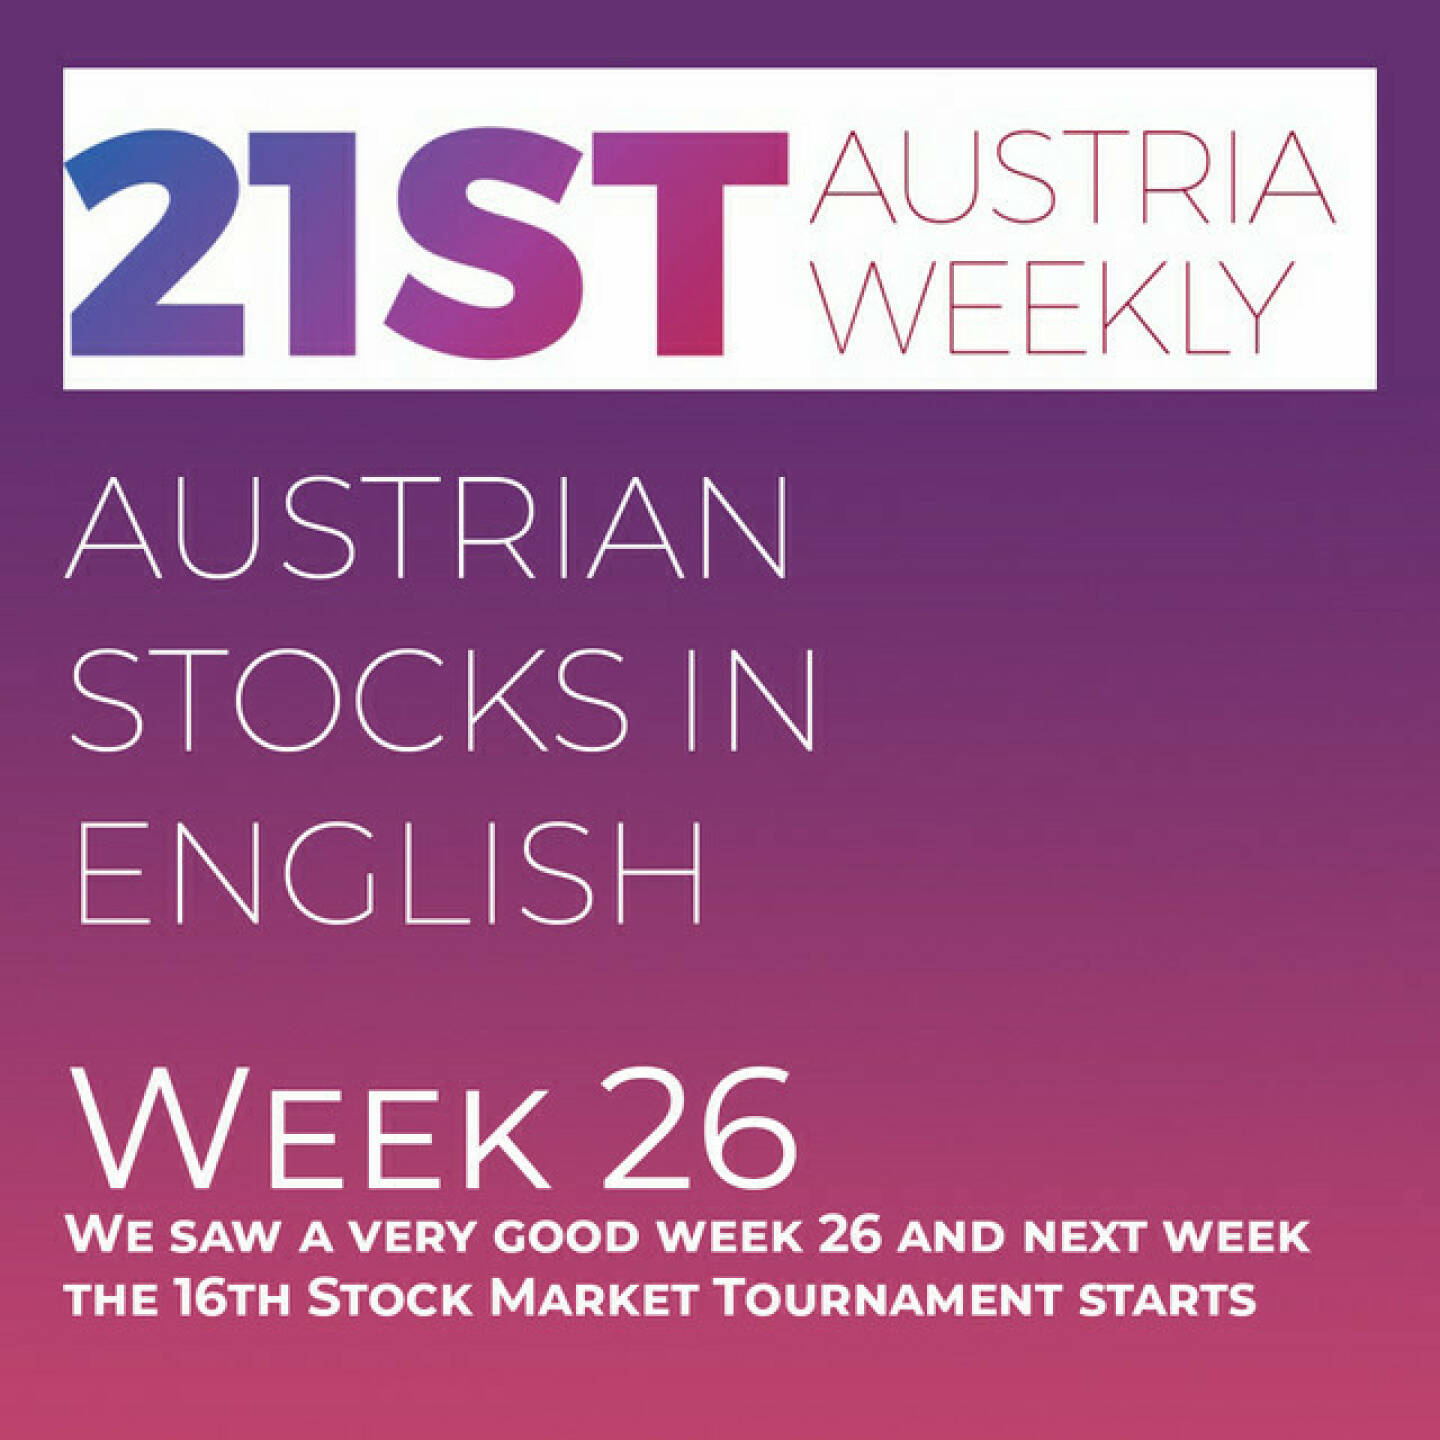 https://open.spotify.com/episode/3VbeKp6oUMC0DDdHh1B99f
Austrian Stocks in English: We saw a very good week 26 and next week the 16th Stock Market Tournament starts - <p>Welcome  to &#34;Austrian Stocks in English - presented by Palfinger&#34;, the english spoken weekly Summary for the Austrian Stock Market,  positioned every Sunday in the mostly german languaged Podcast &#34;Audio-CD.at Indie Podcasts&#34;- Wiener Börse, Sport Musik und Mehr“ .<br/><br/>The following script is based on our 21st Austria weekly and week 26 was a strong week, the ATX TR went up 3,23% to 6.947,91 points, . Year-to-date the ATX TR is now plus 5,32%. Next week the 16th Stock Market Tournament starts and this Tournament is presented by IRW Press and the defending Champion VIG. <br/><br/>News came from Andritz (3), Verbund, CA Immo (2), S Immo (2), Zumtobel, Verbund and FACC, spoken by the absolutely smart Alison.<br/><br/><a href=http://www.boerse-social.com/tournament target=_blank>http://www.boerse-social.com/tournament</a><br/><br/><a href=https://boerse-social.com/21staustria target=_blank>https://boerse-social.com/21staustria</a><br/><br/>Please rate my Podcast on Apple Podcasts (or Spotify): <a href=https://podcasts.apple.com/at/podcast/audio-cd-at-indie-podcasts-wiener-boerse-sport-musik-und-mehr/id1484919130 target=_blank>https://podcasts.apple.com/at/podcast/audio-cd-at-indie-podcasts-wiener-boerse-sport-musik-und-mehr/id1484919130</a> .And please spread the word : <a href=https://www.boerse-social.com/21staustria target=_blank>https://www.boerse-social.com/21staustria</a> - the address to subscribe to the weekly summary as a PDF.</p>